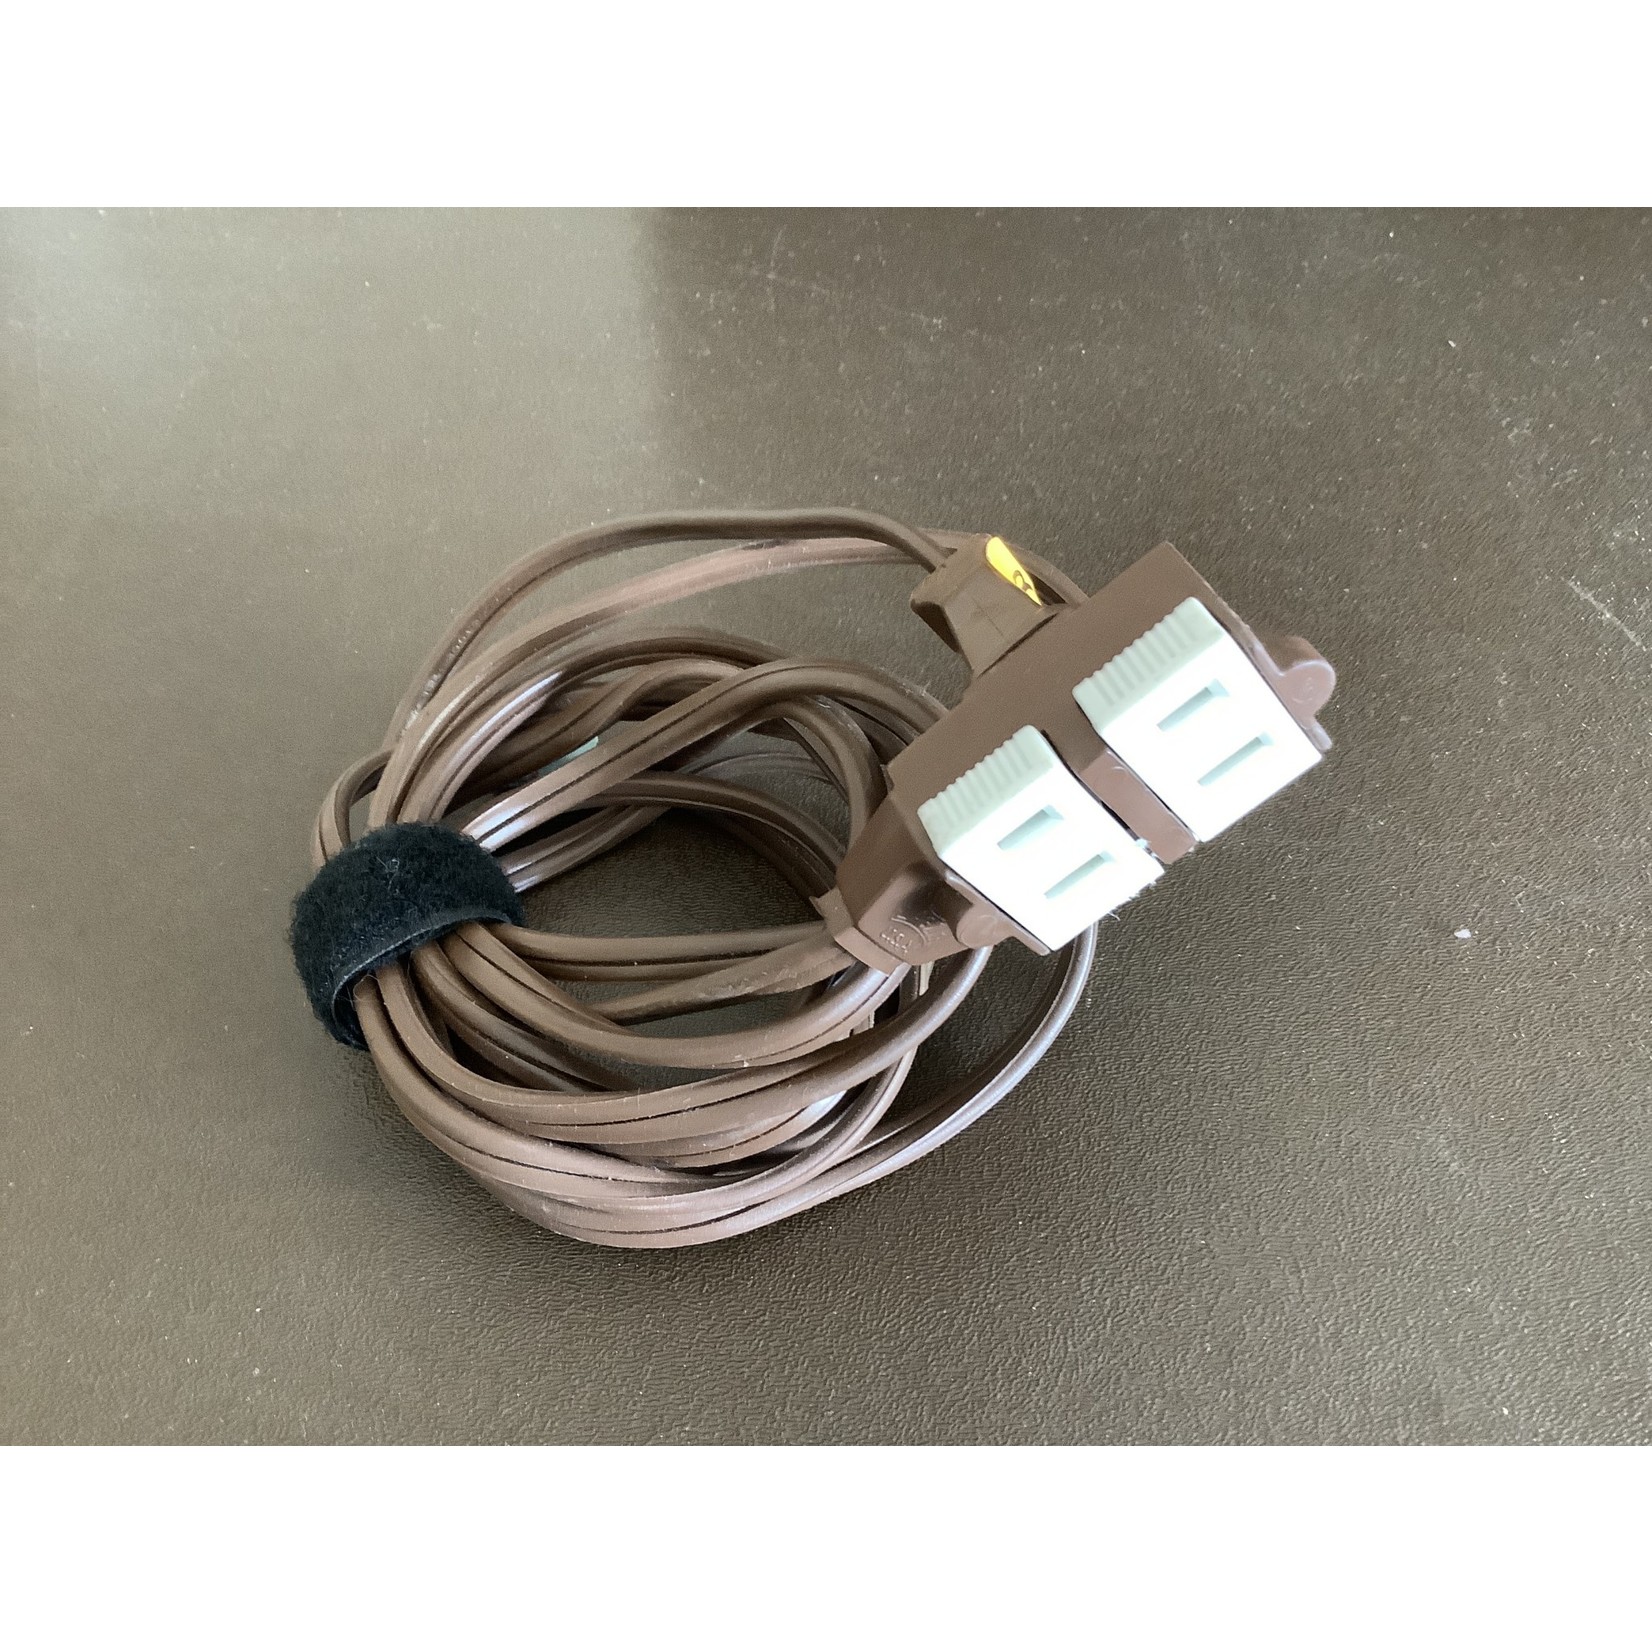 Brown Extension Cords